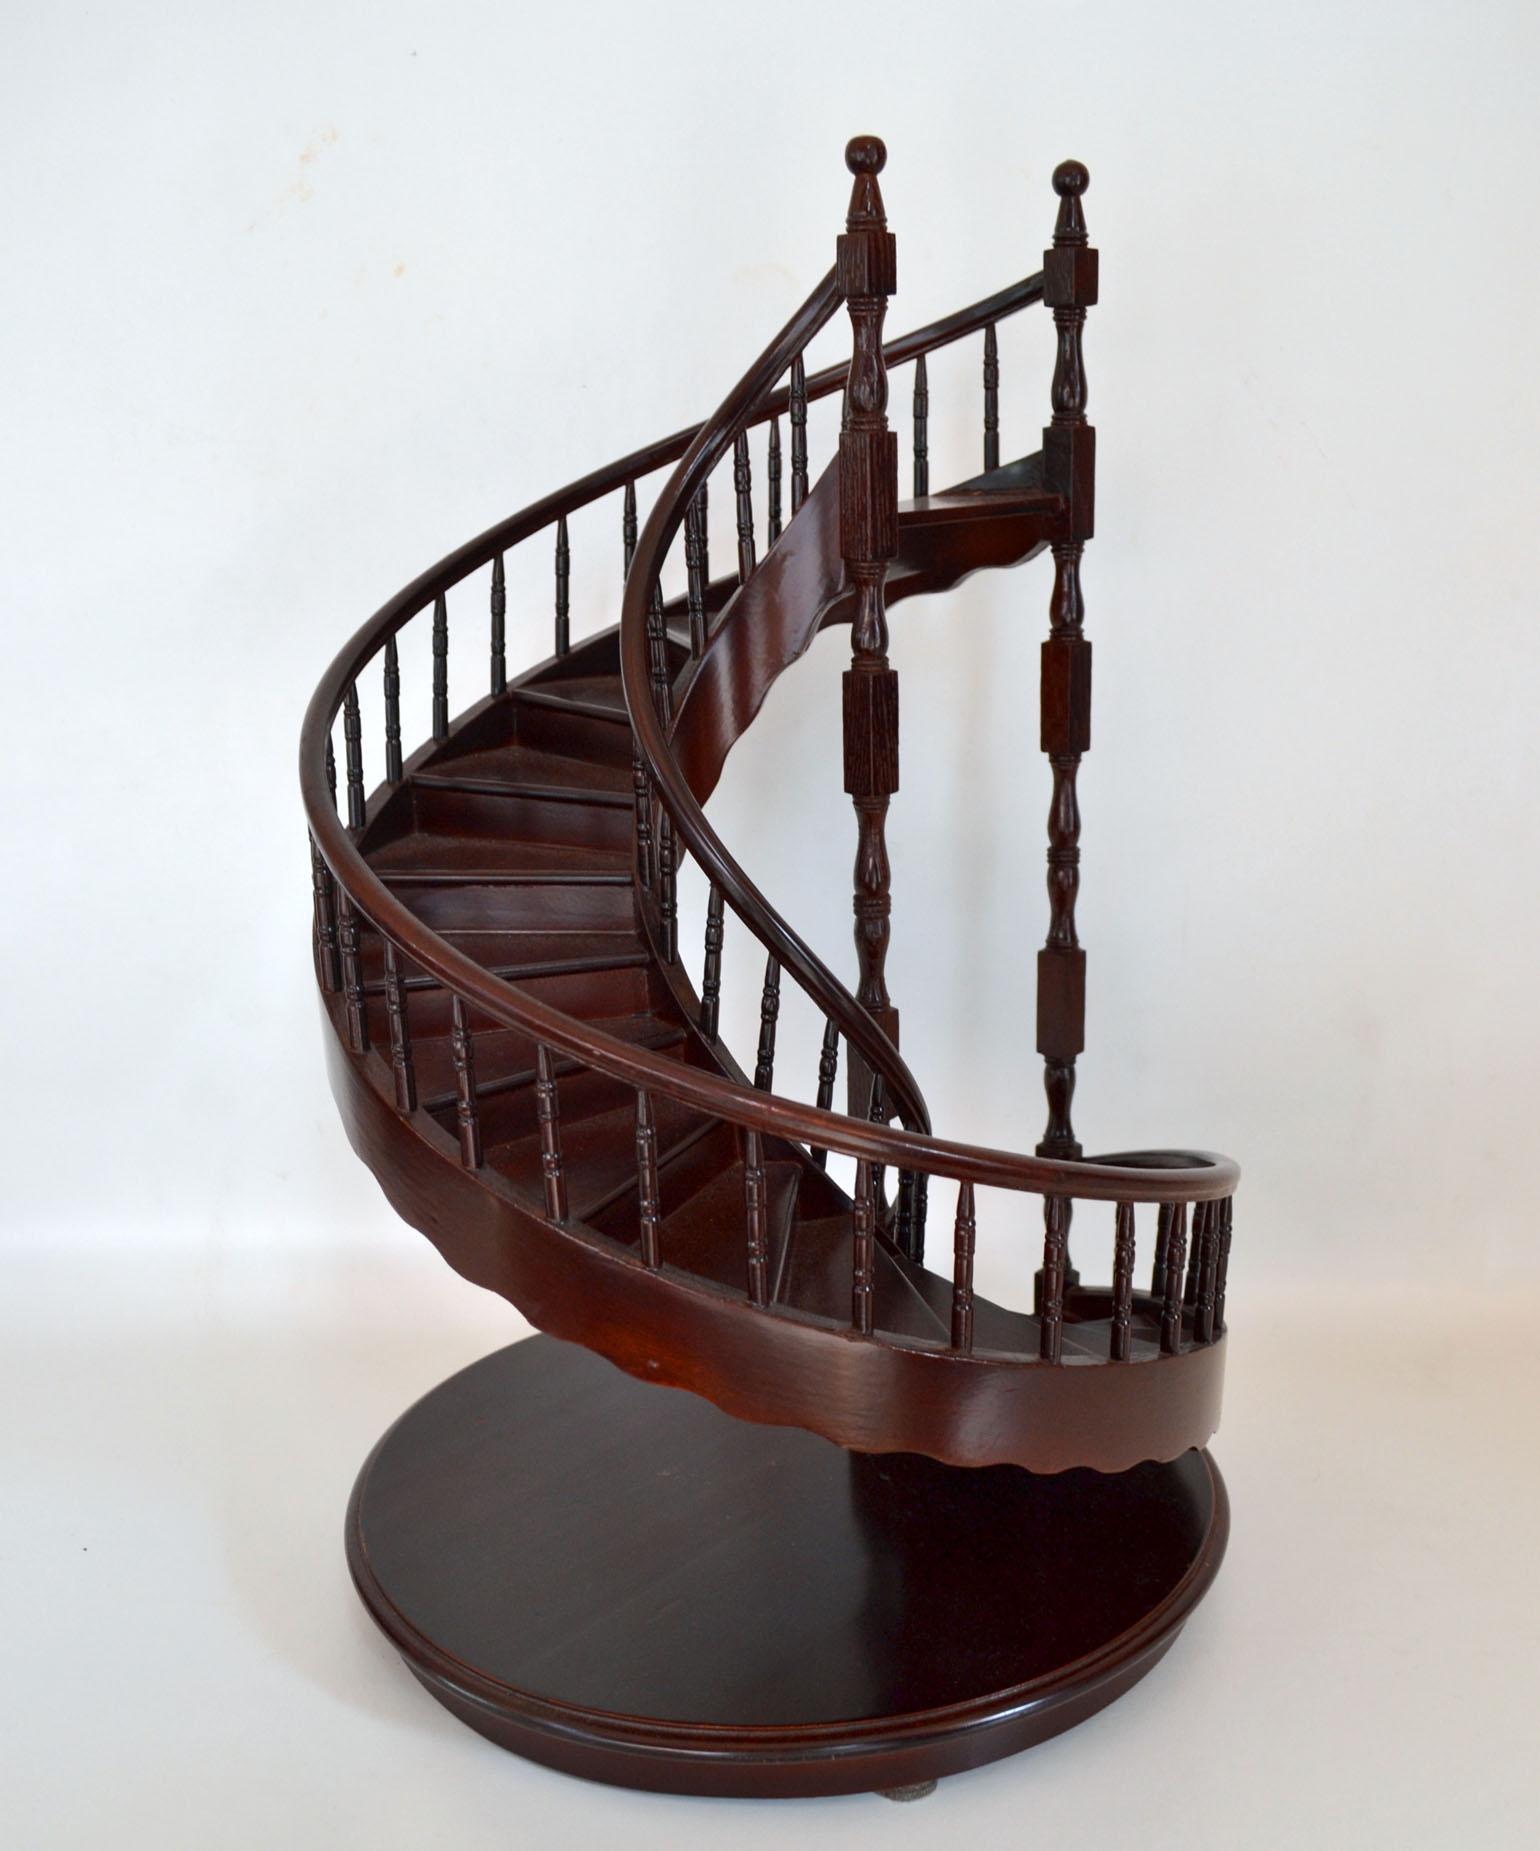 French 20th century model of a spiral staircase of late 18th century design, with fifteen steps, double turned balusters on a circular plinth base made of mahogany in superb quality. This wooden piece of architecture, completely handmade. It is